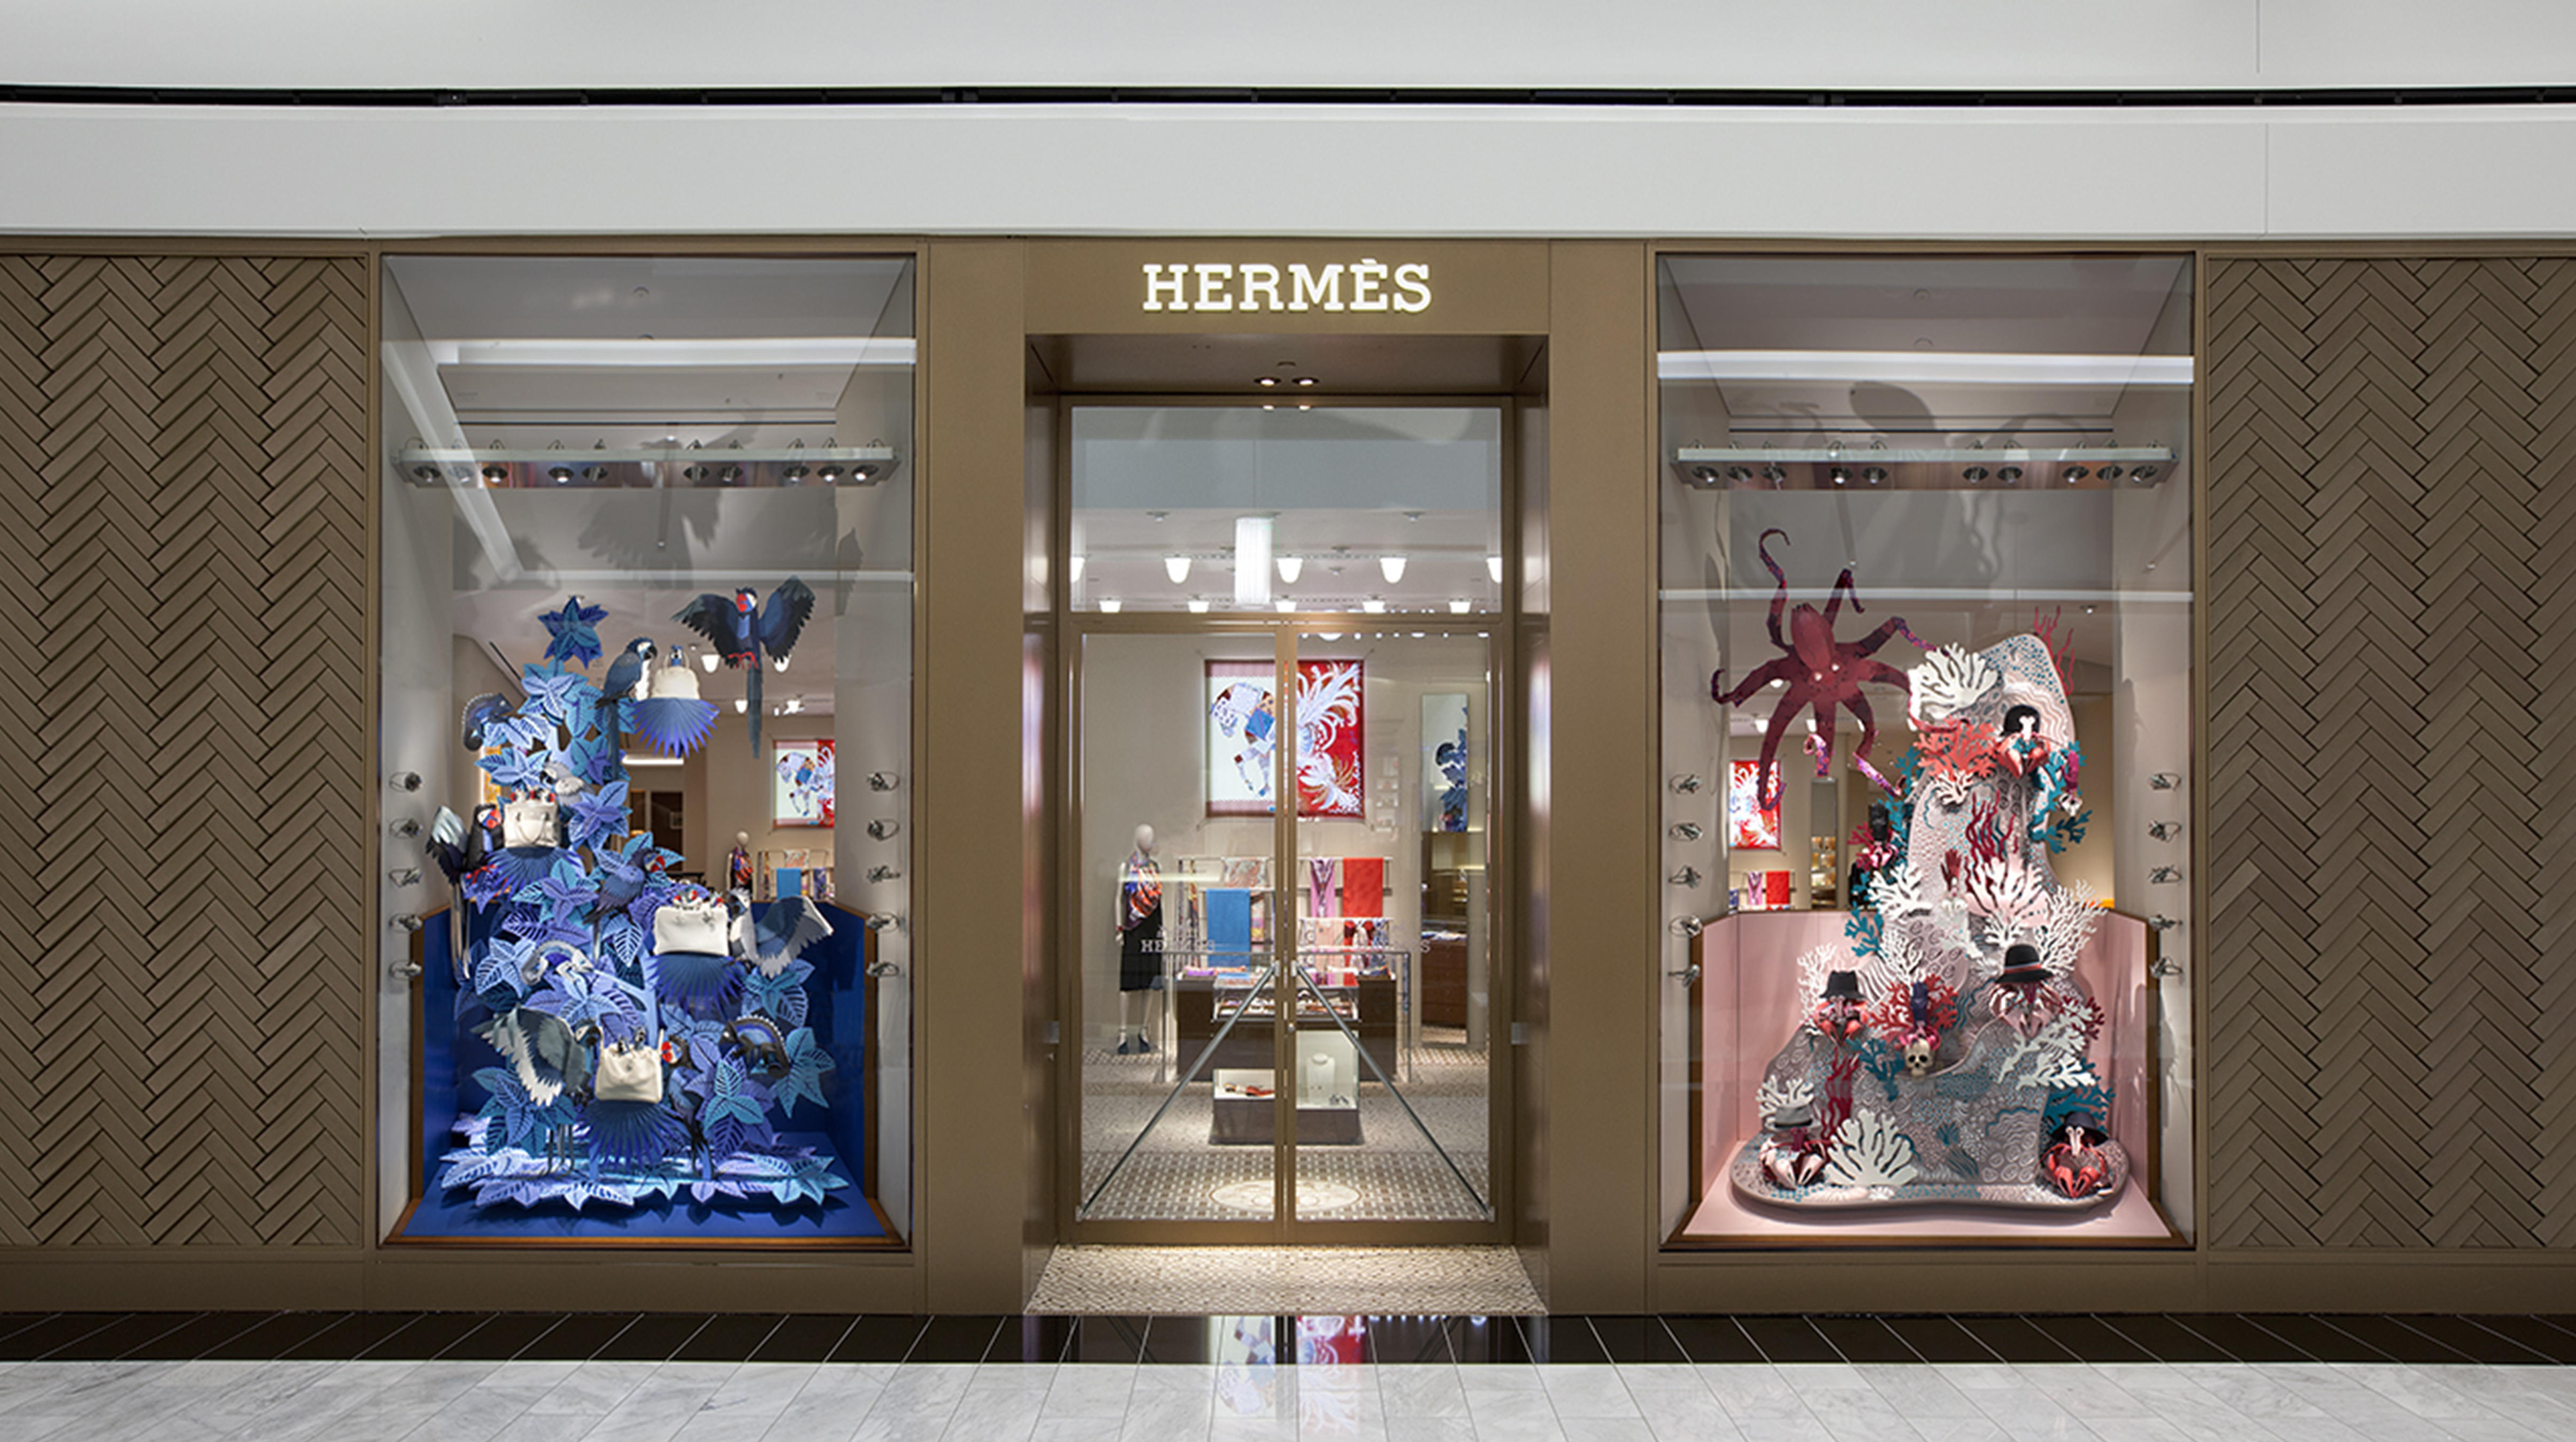 Hermes in King of Prussia, PA (Leather Goods) - 610-992-9730 | www.paulmartinsmith.com